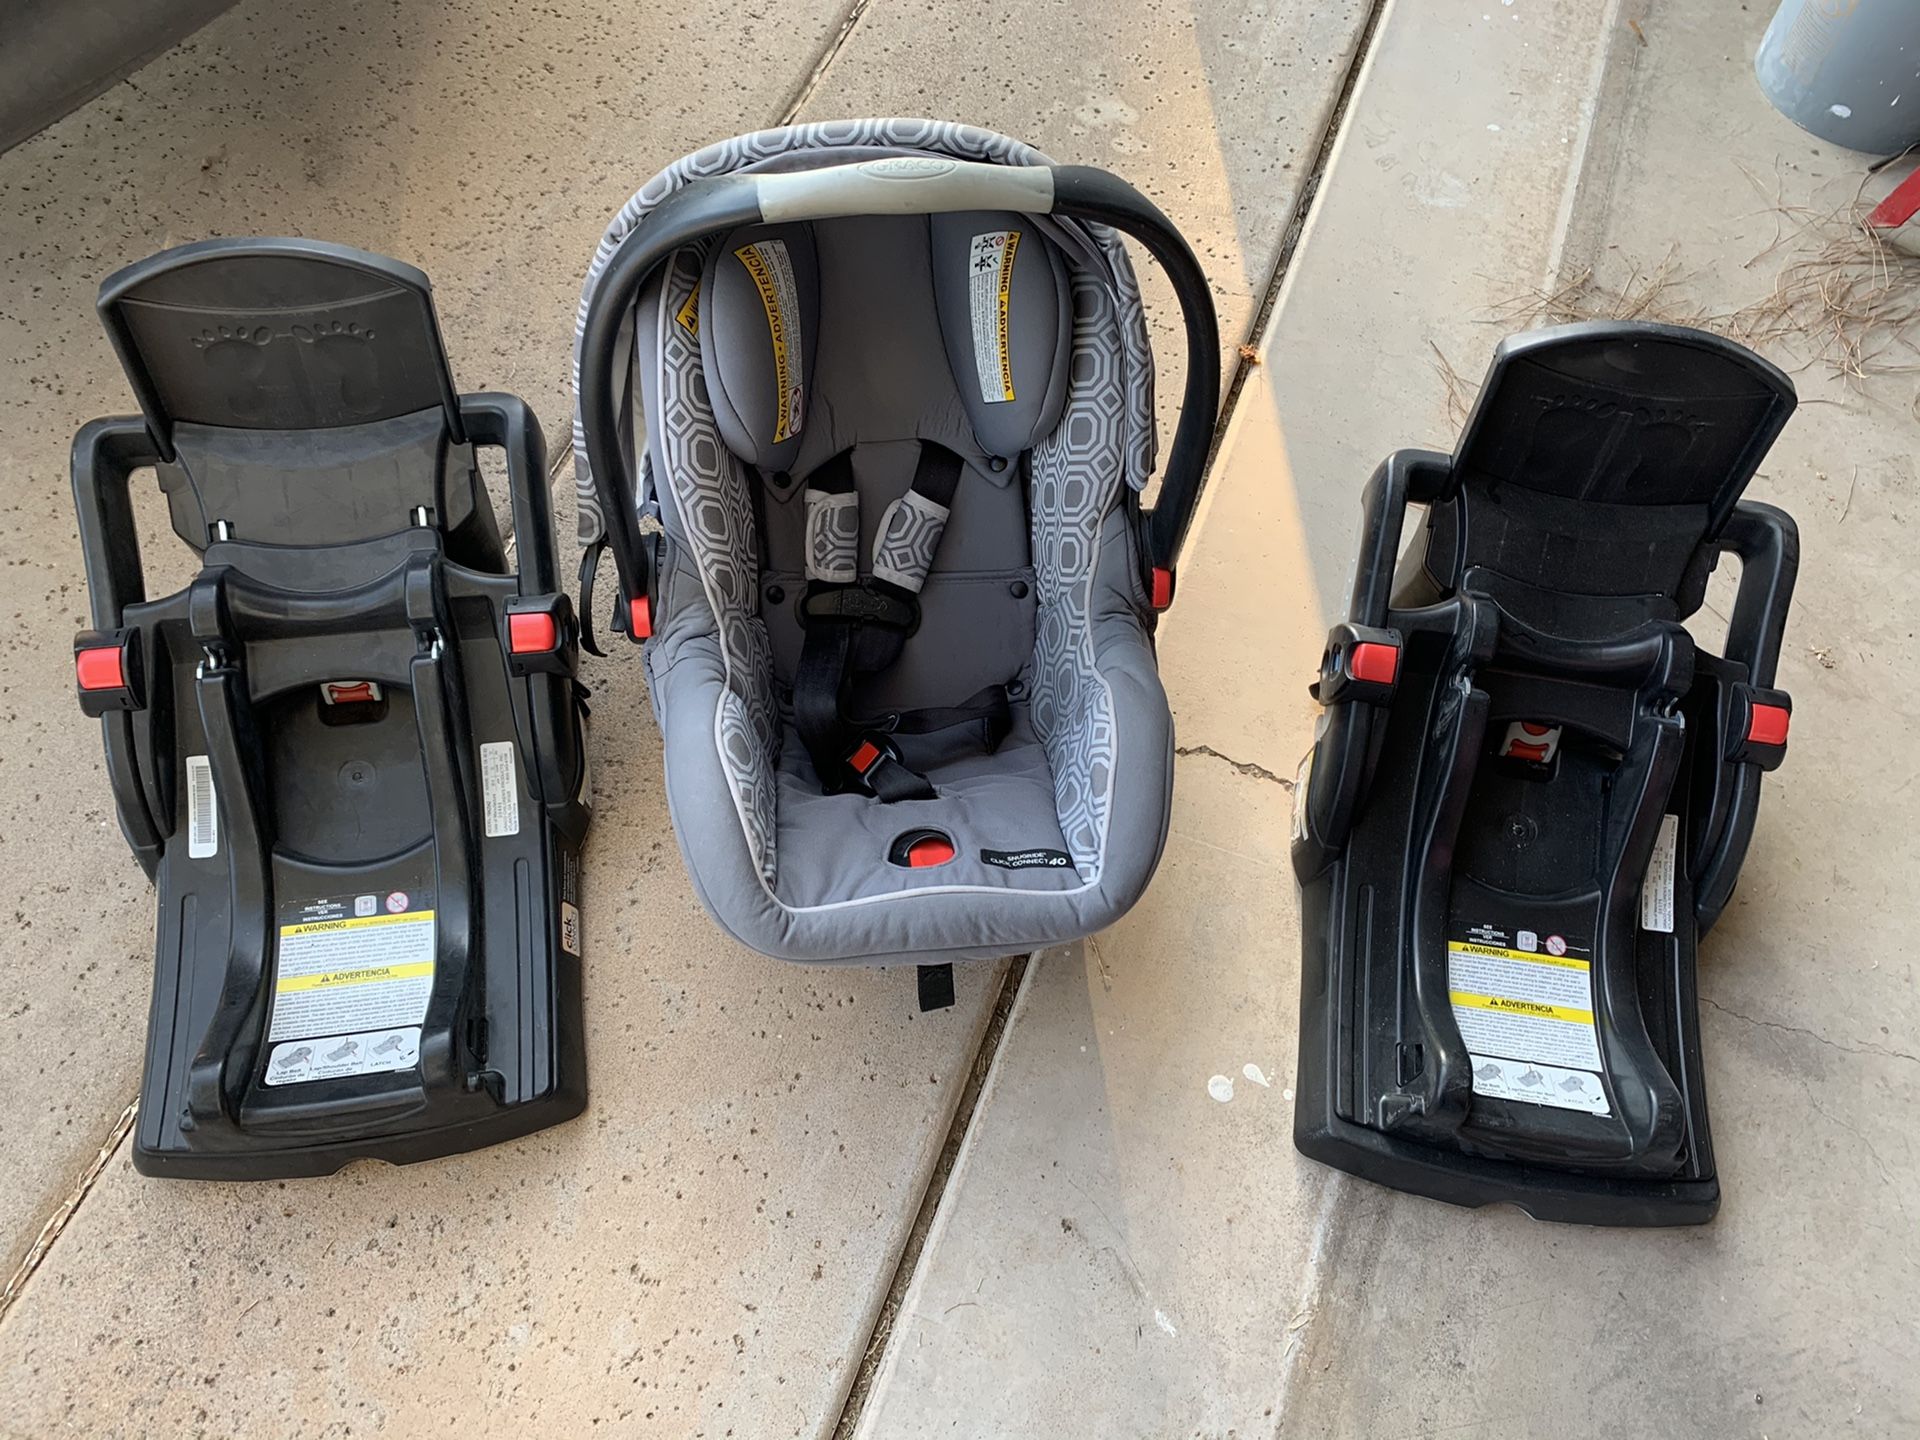 Graco click connect car seat and 2 bases